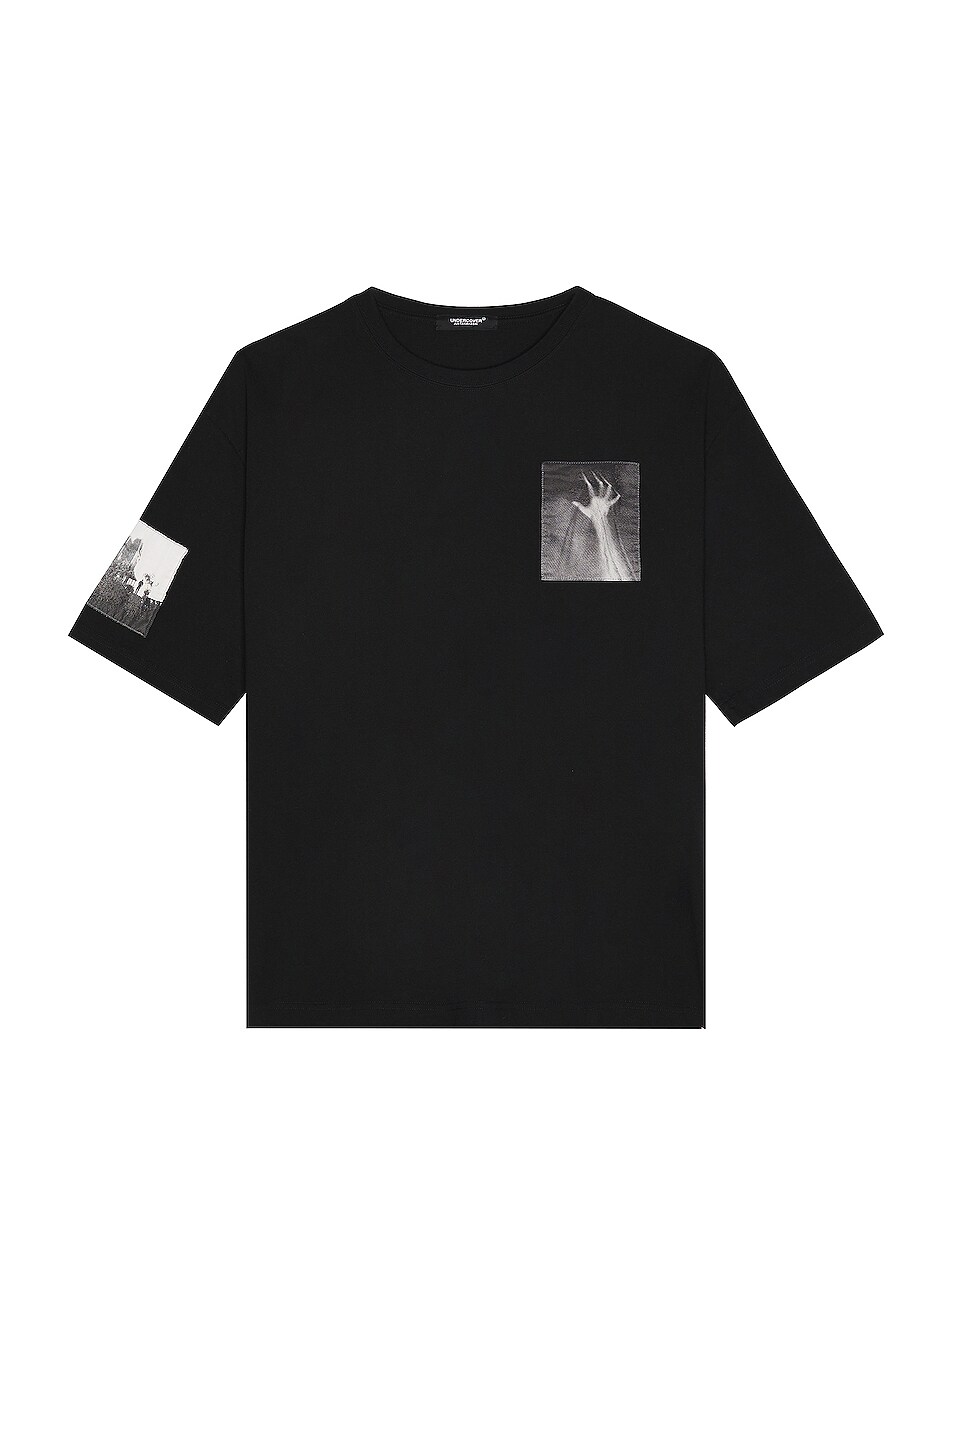 Image 1 of Undercover Tee in Black